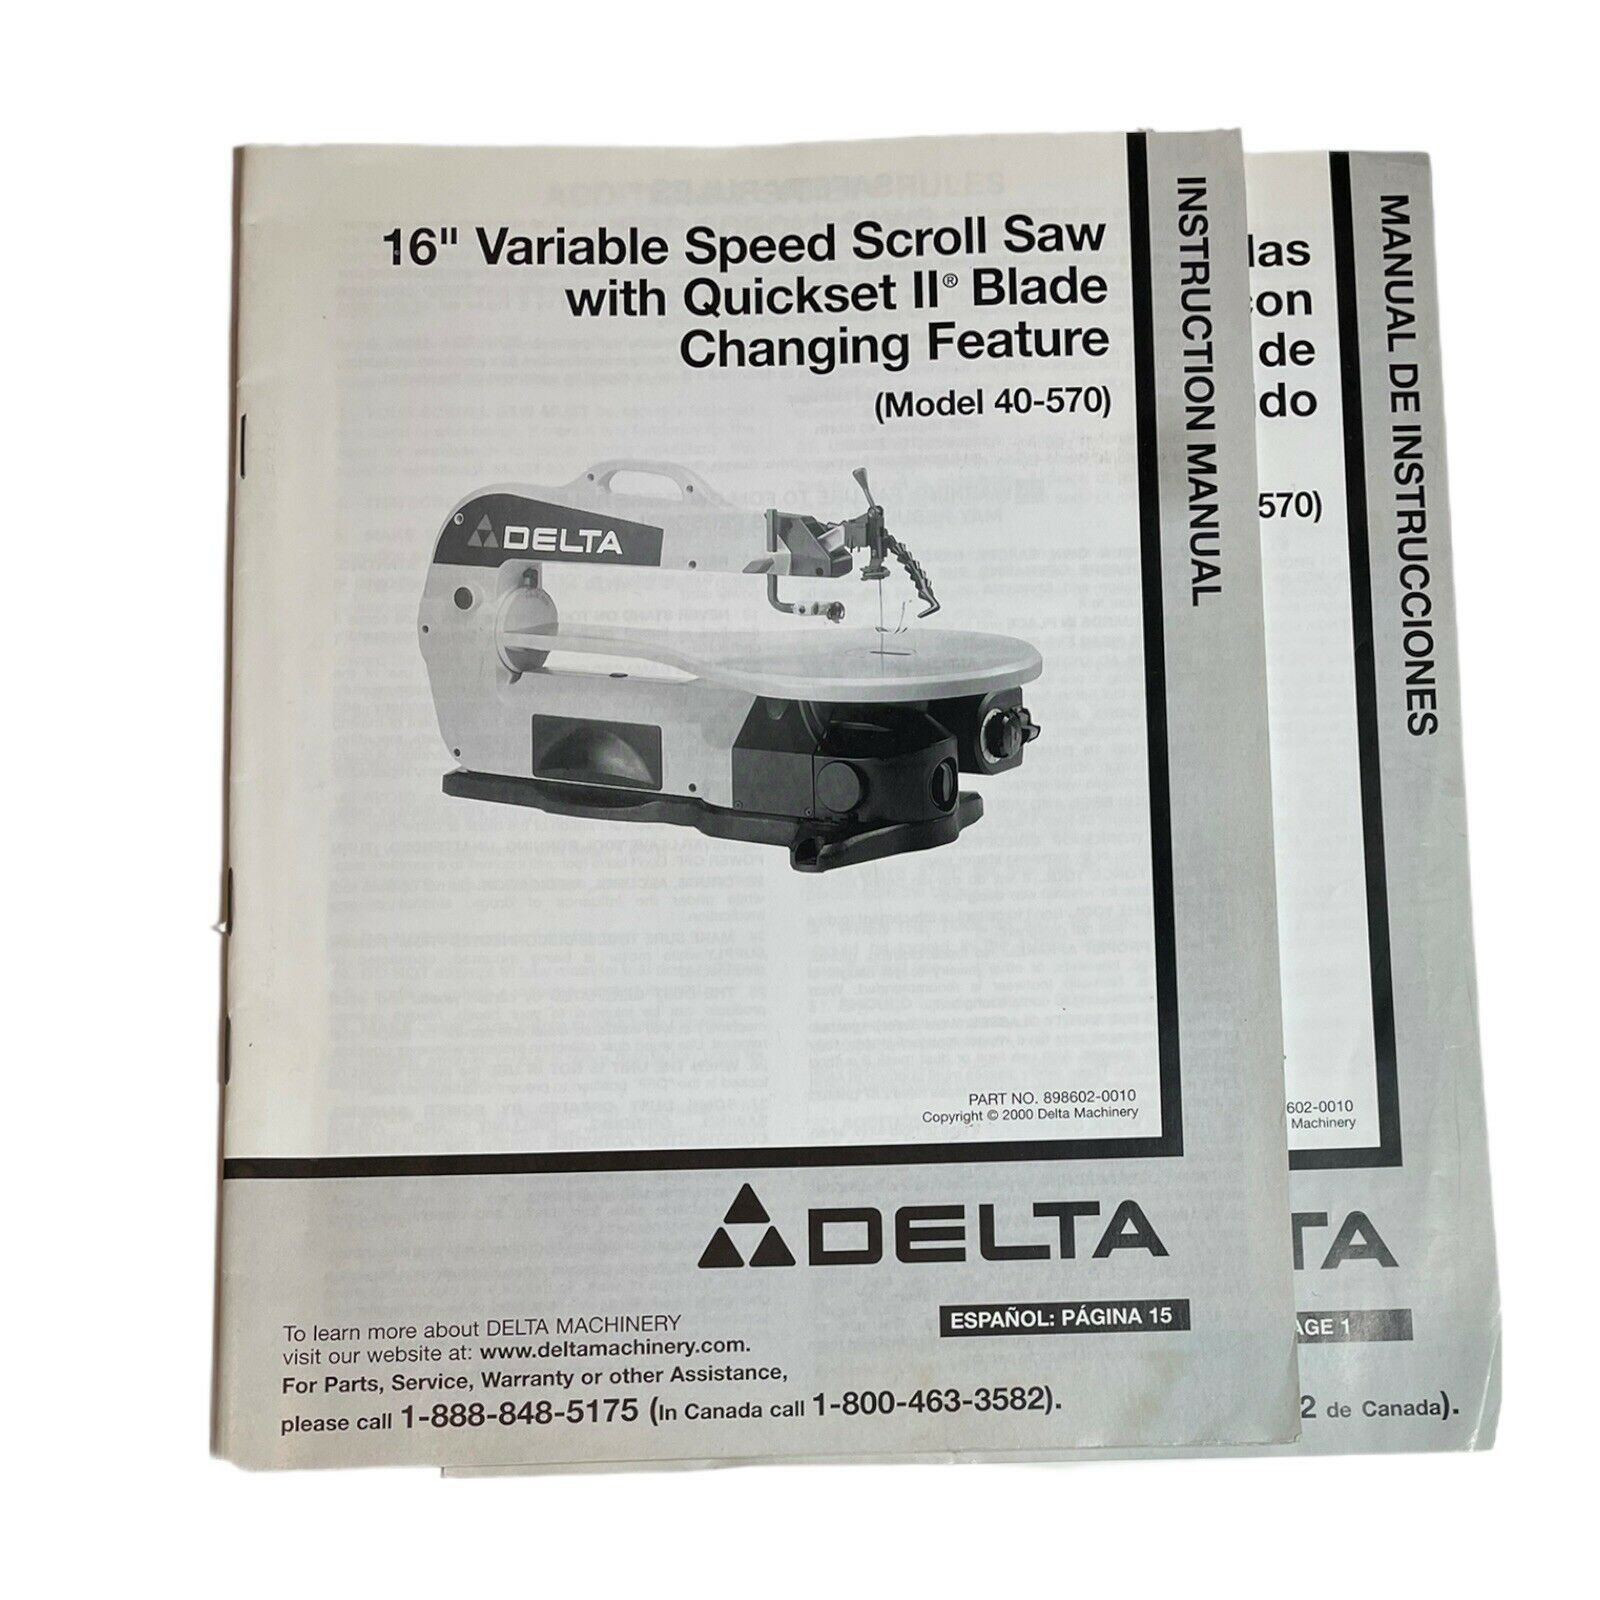 Delta 16" Variable Speed Scroll Saw 40-570 Instruction Operators Manual